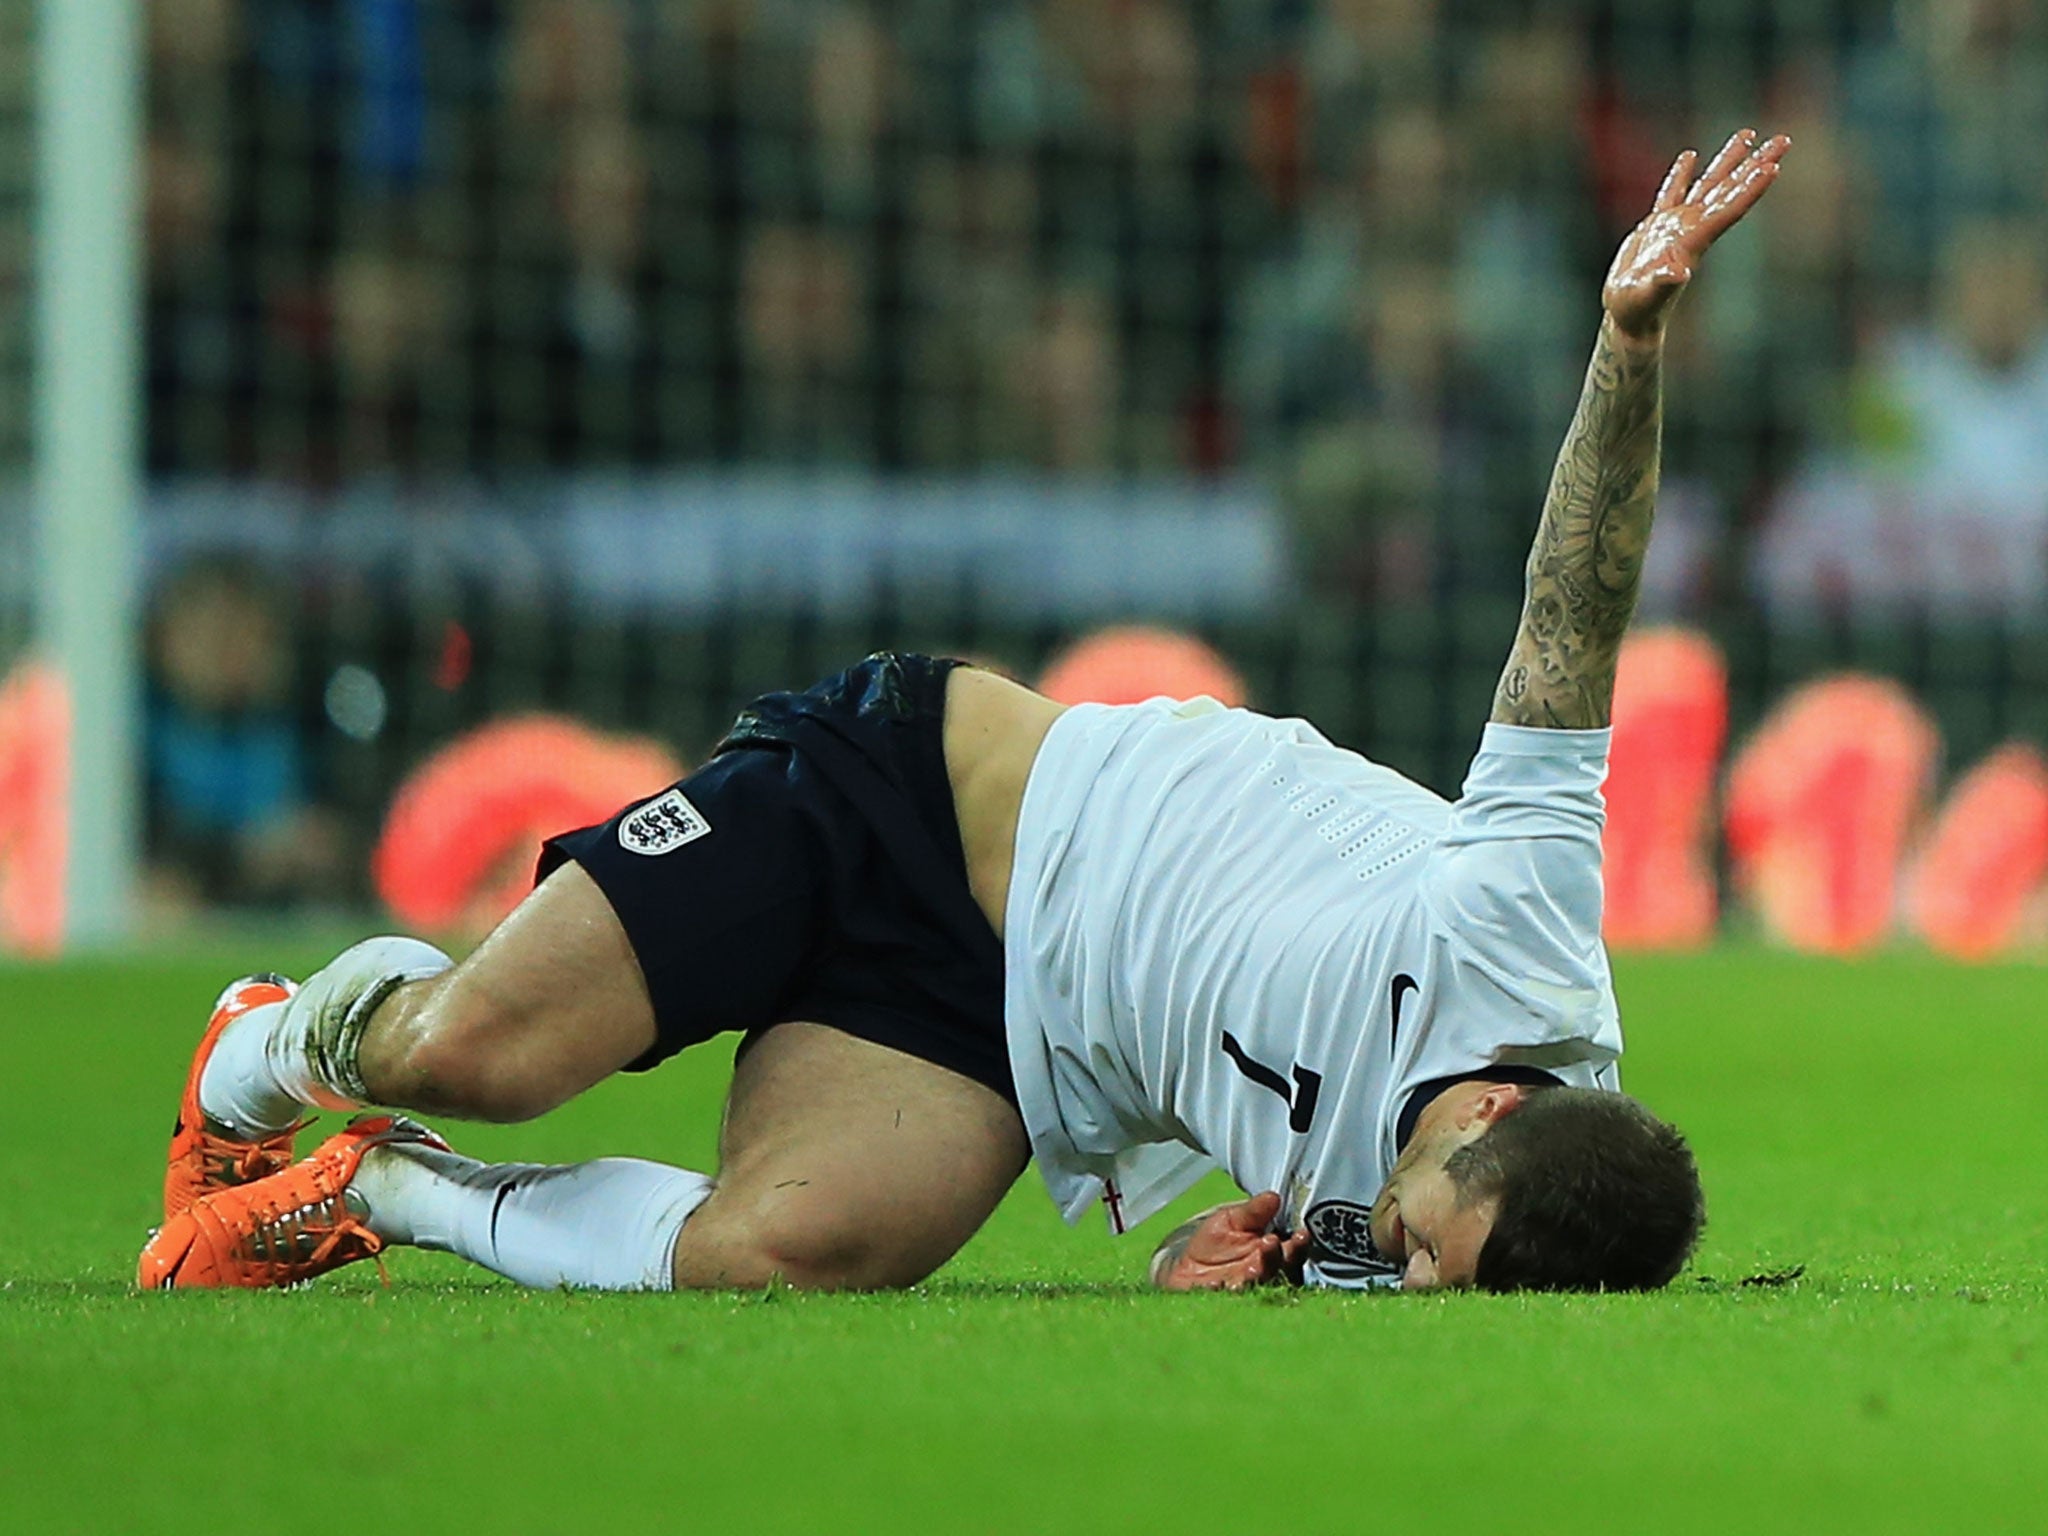 Jack Wilshere grimaces after Daniel Agger's tackle left him in agony in England's 1-0 friendly win over Denmark at Wembley